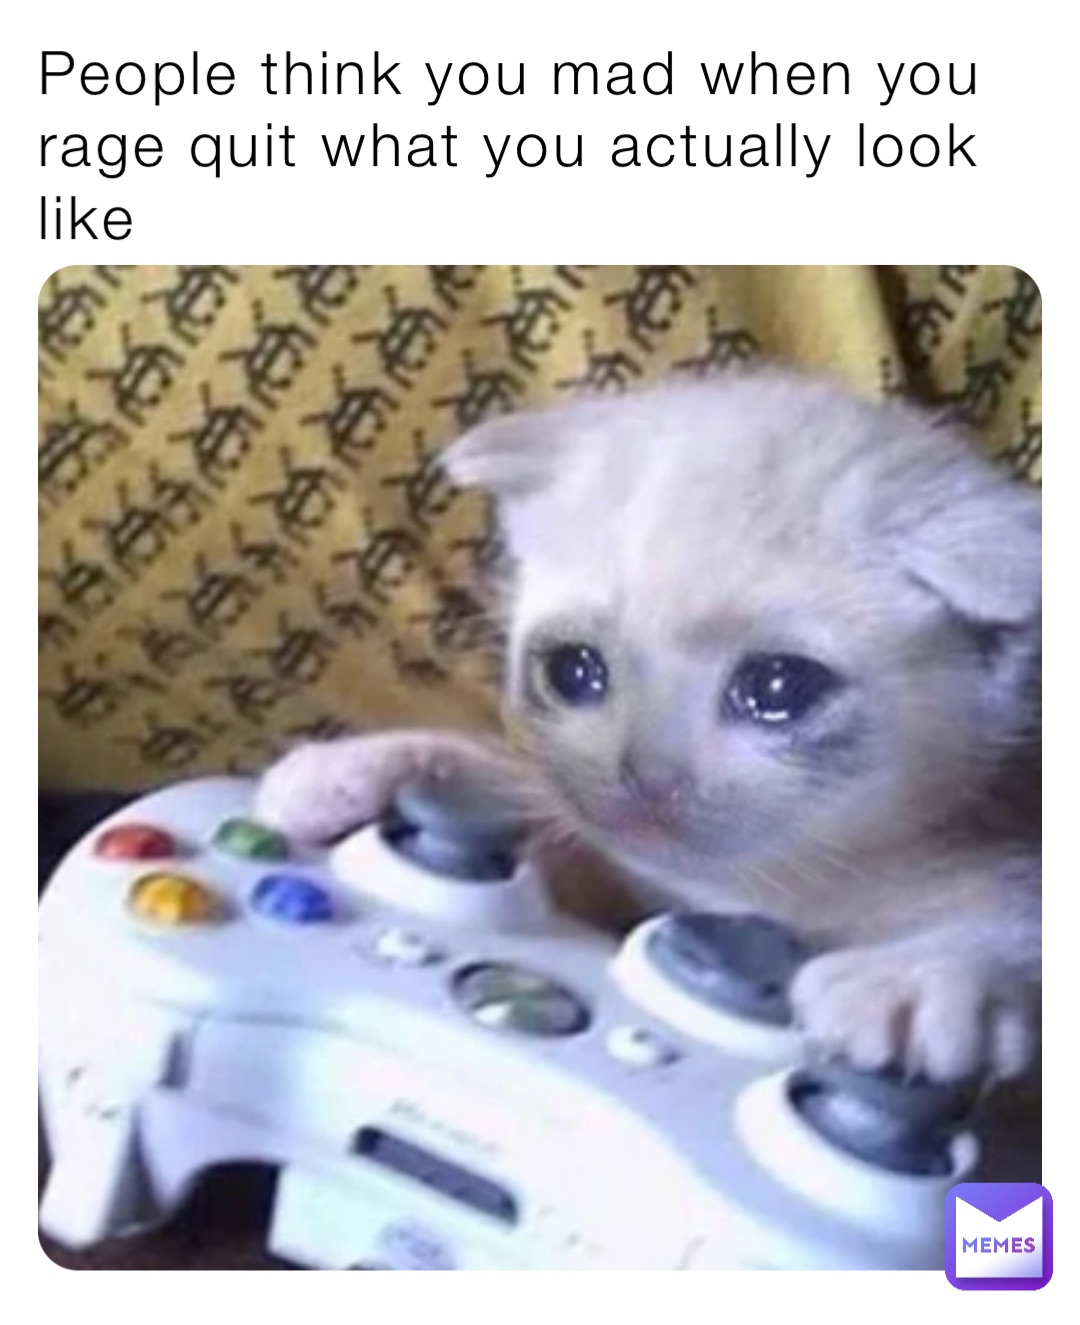 People think you mad when you rage quit what you actually look like